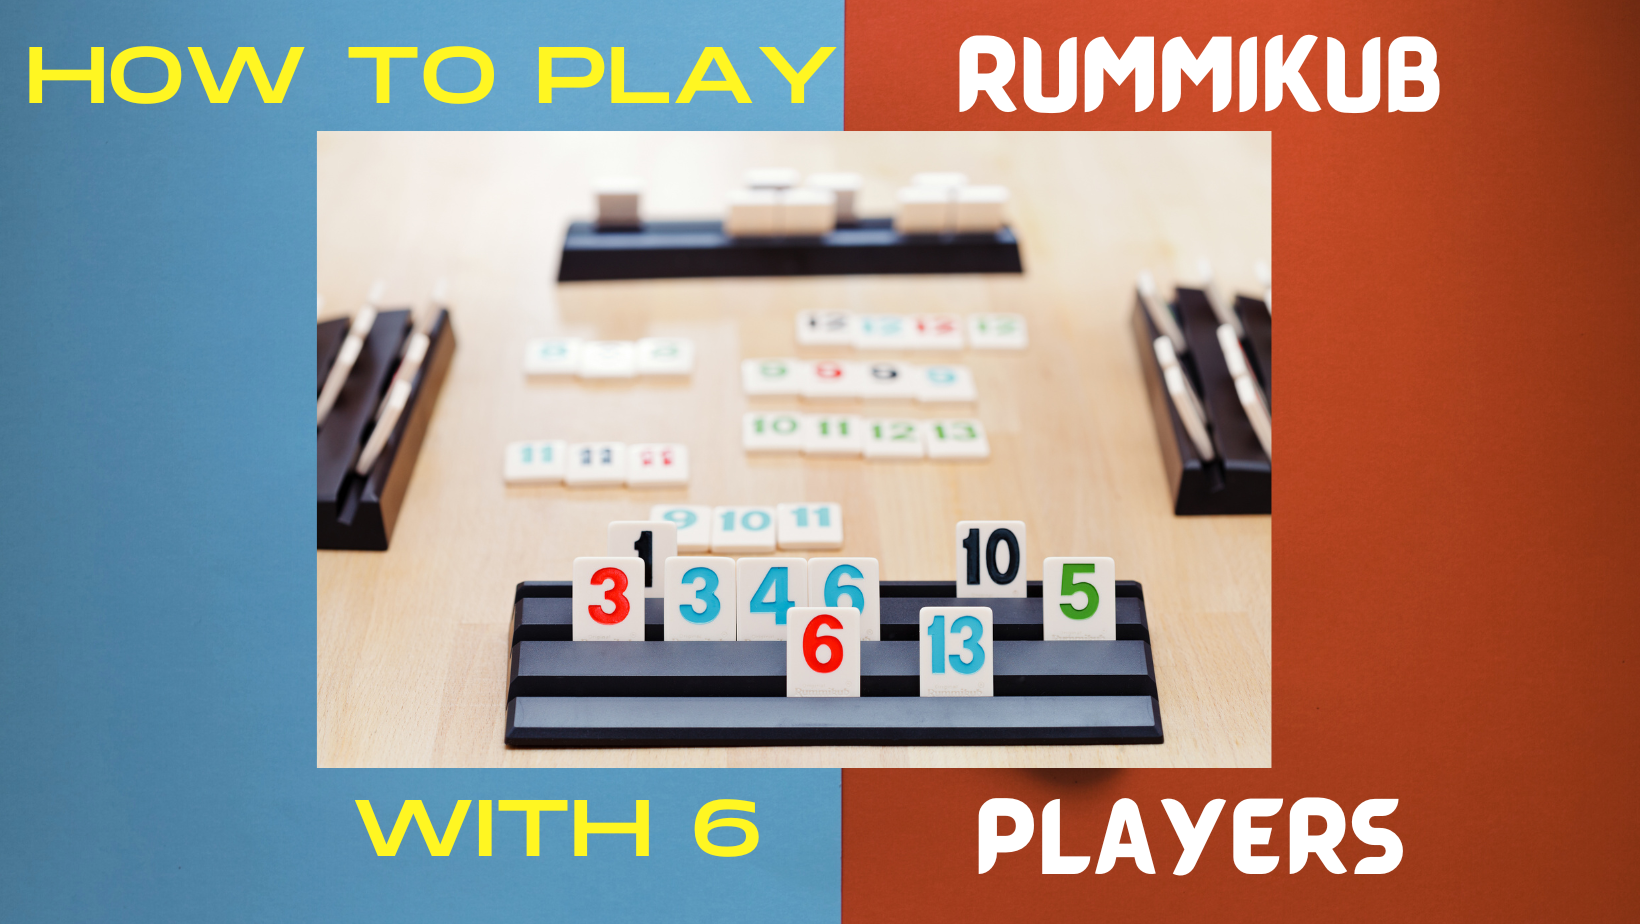 How to Play Rummikub With 6 Players